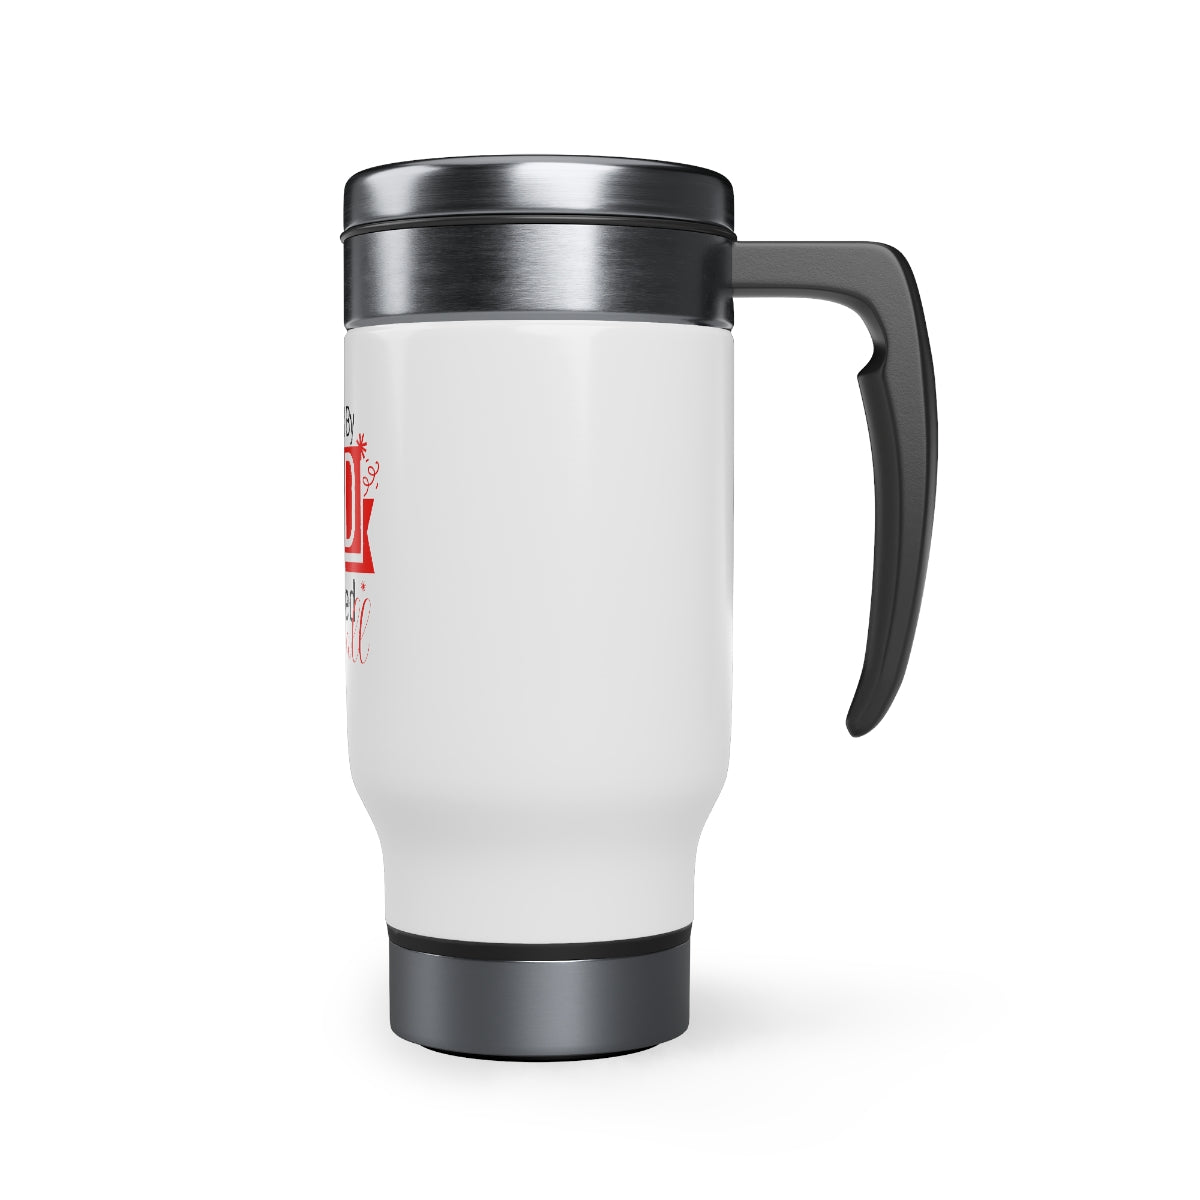 Humbled by God To Be Elevated Above All Stainless Steel Travel Mug with Handle, 14oz Printify